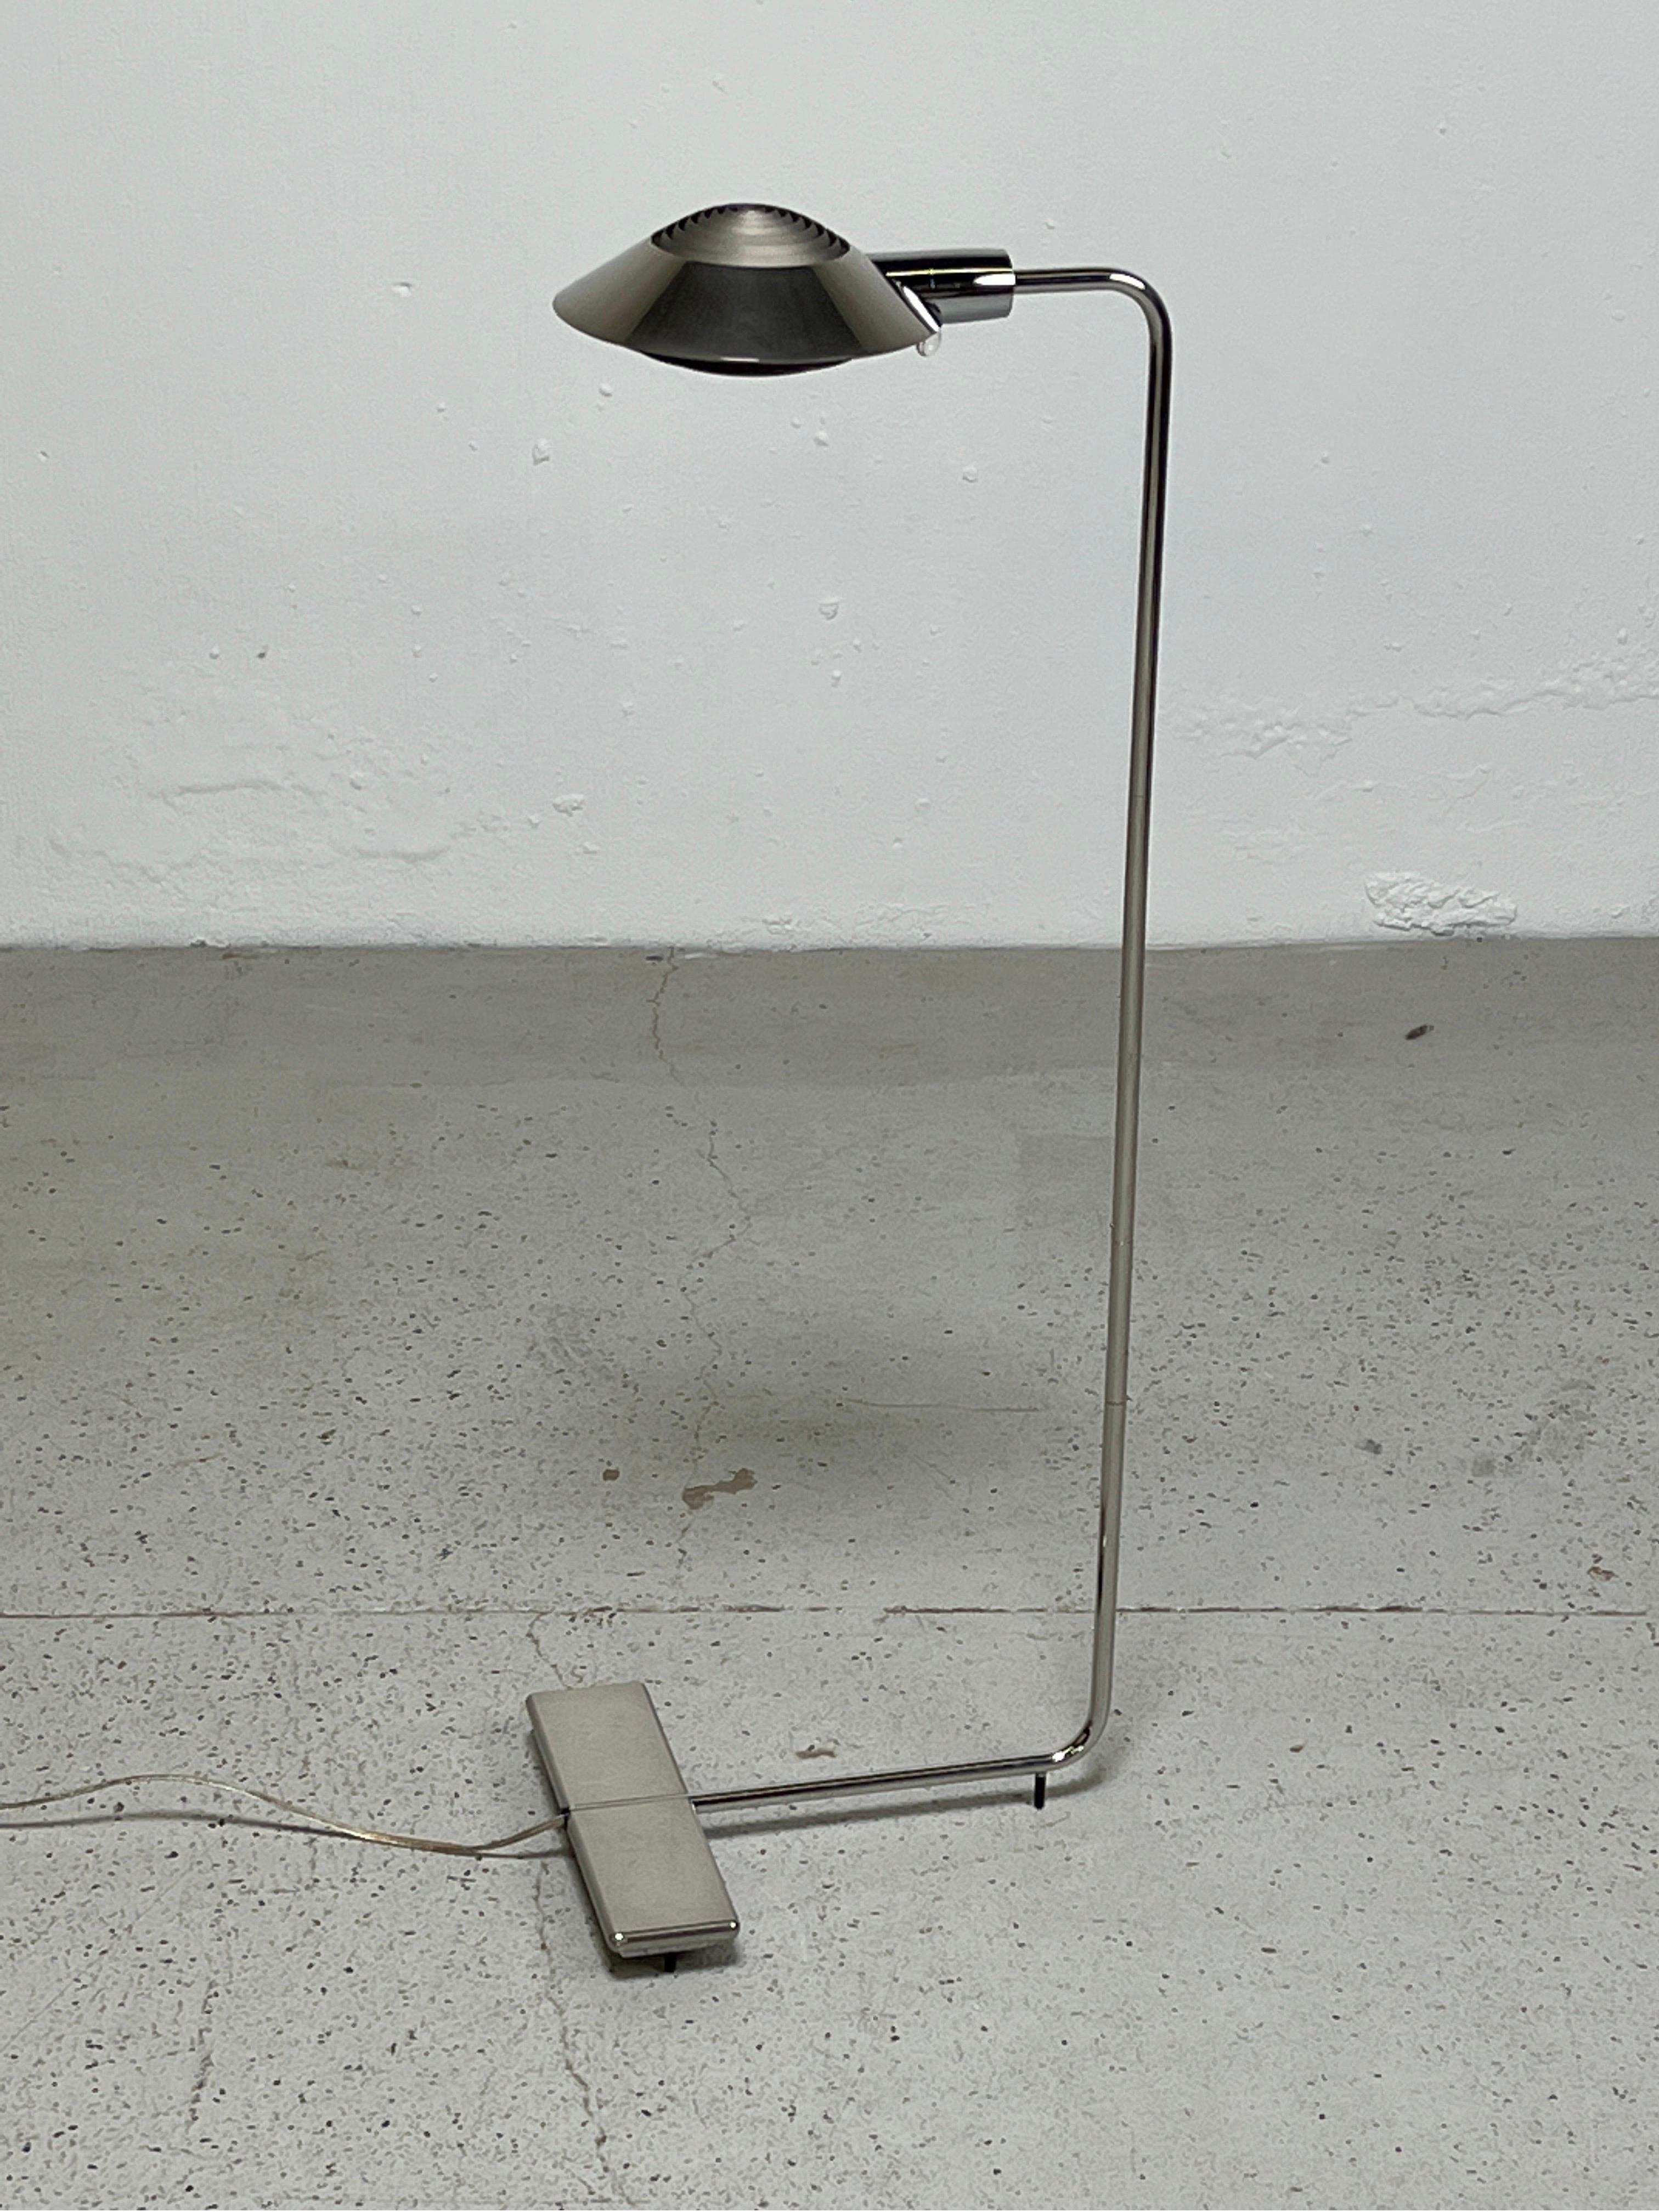 A chrome floor lamp designed by Cedric Hartman. Adjustable height and swivel but the hood does not rotate.